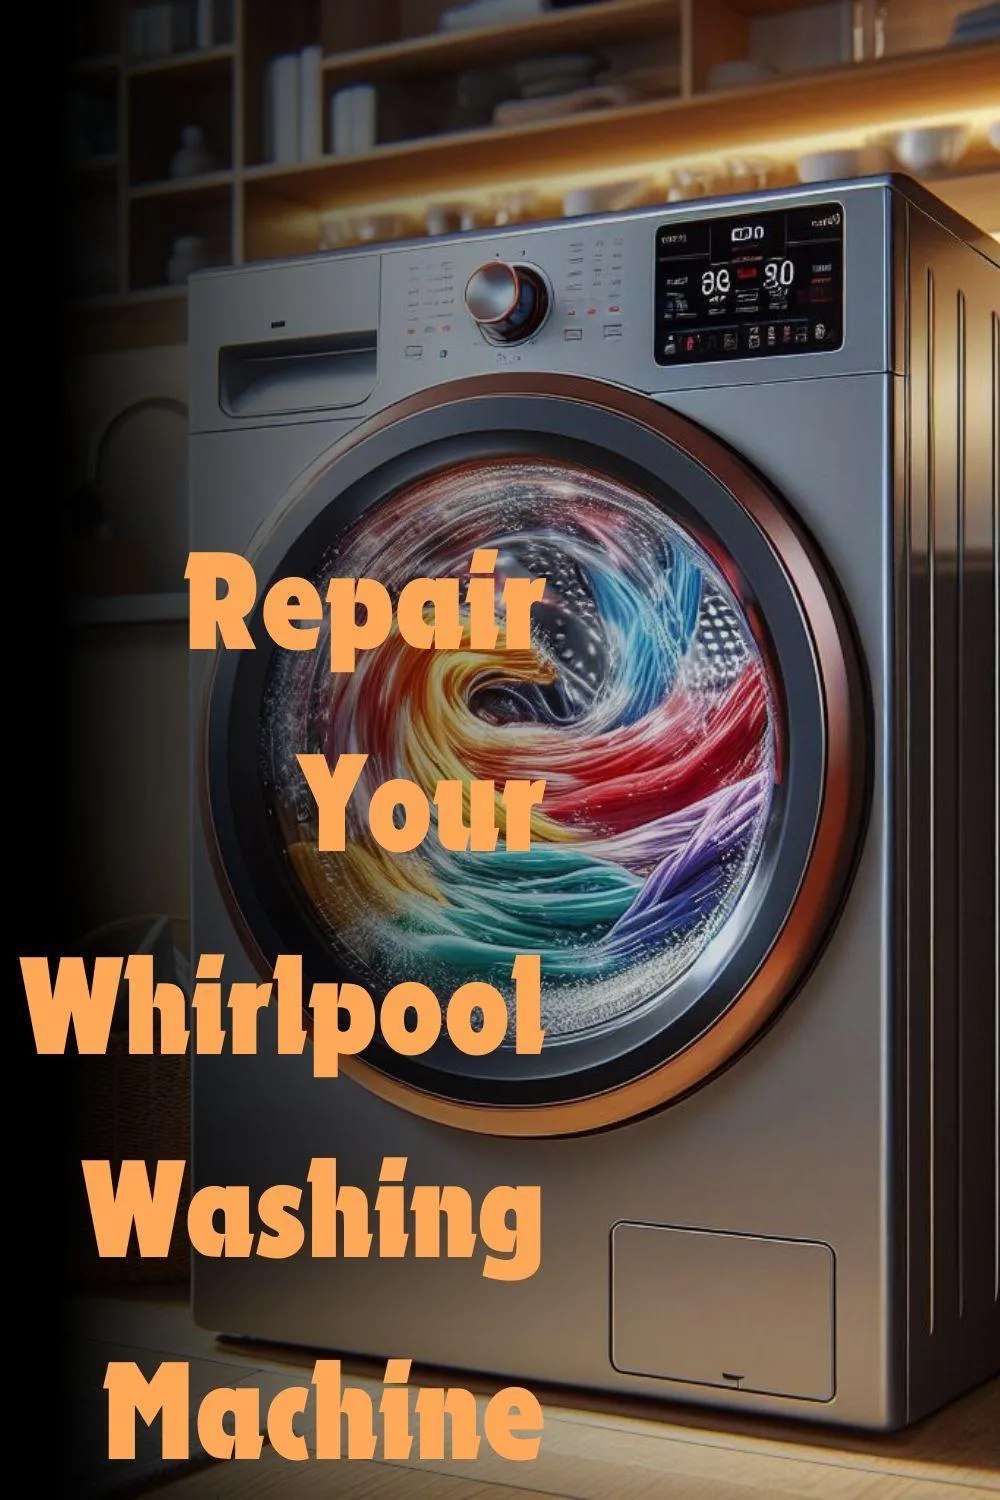 Fix Your Whirlpool Washer: DIY Troubleshooting and Repair Guide